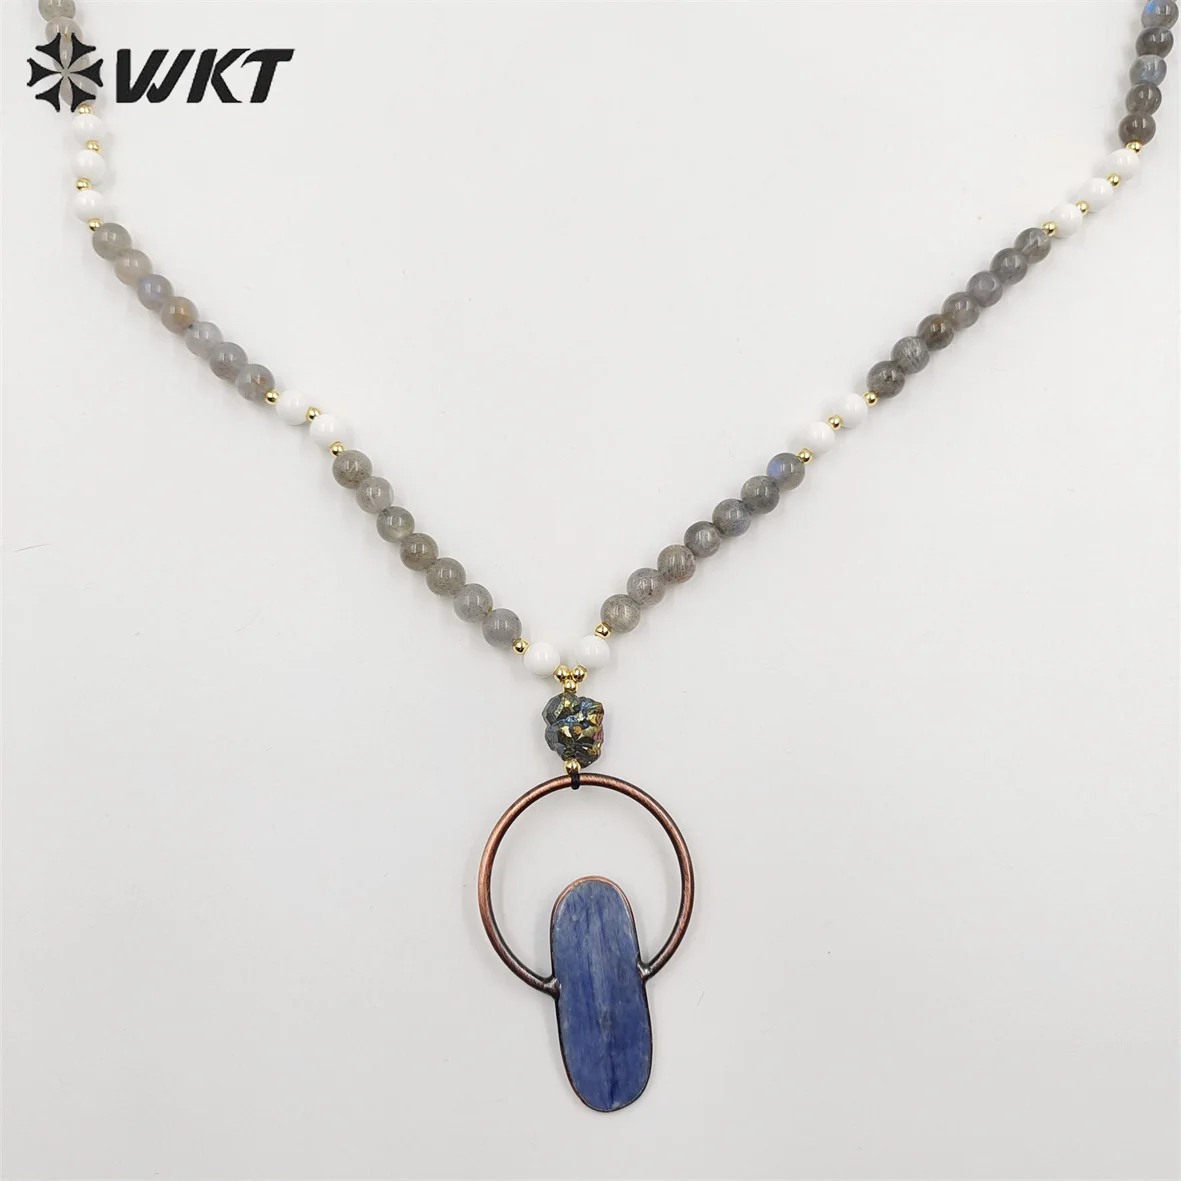 

WT-N1413 WKT 2023 Retro Party Necklace Kyanite And Labradorite Hip Hop Party Women Pendant Jewelry Trend 30Inch